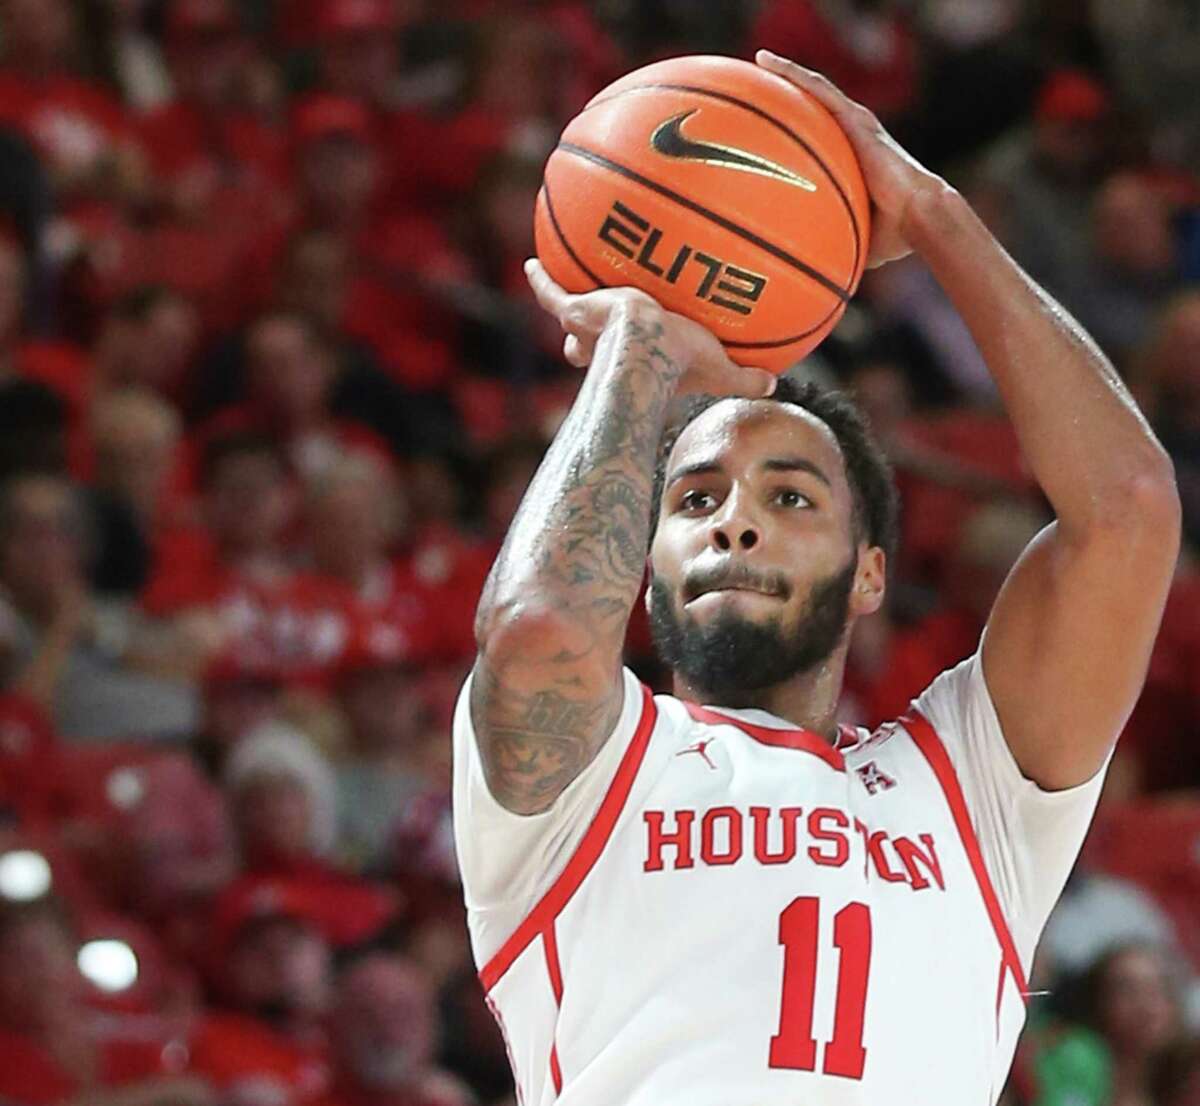 Guard Kyler Edwards leads UH in scoring (12.1 points per game) and 3-pointers (33) and is second with 5.9 rebounds per game.